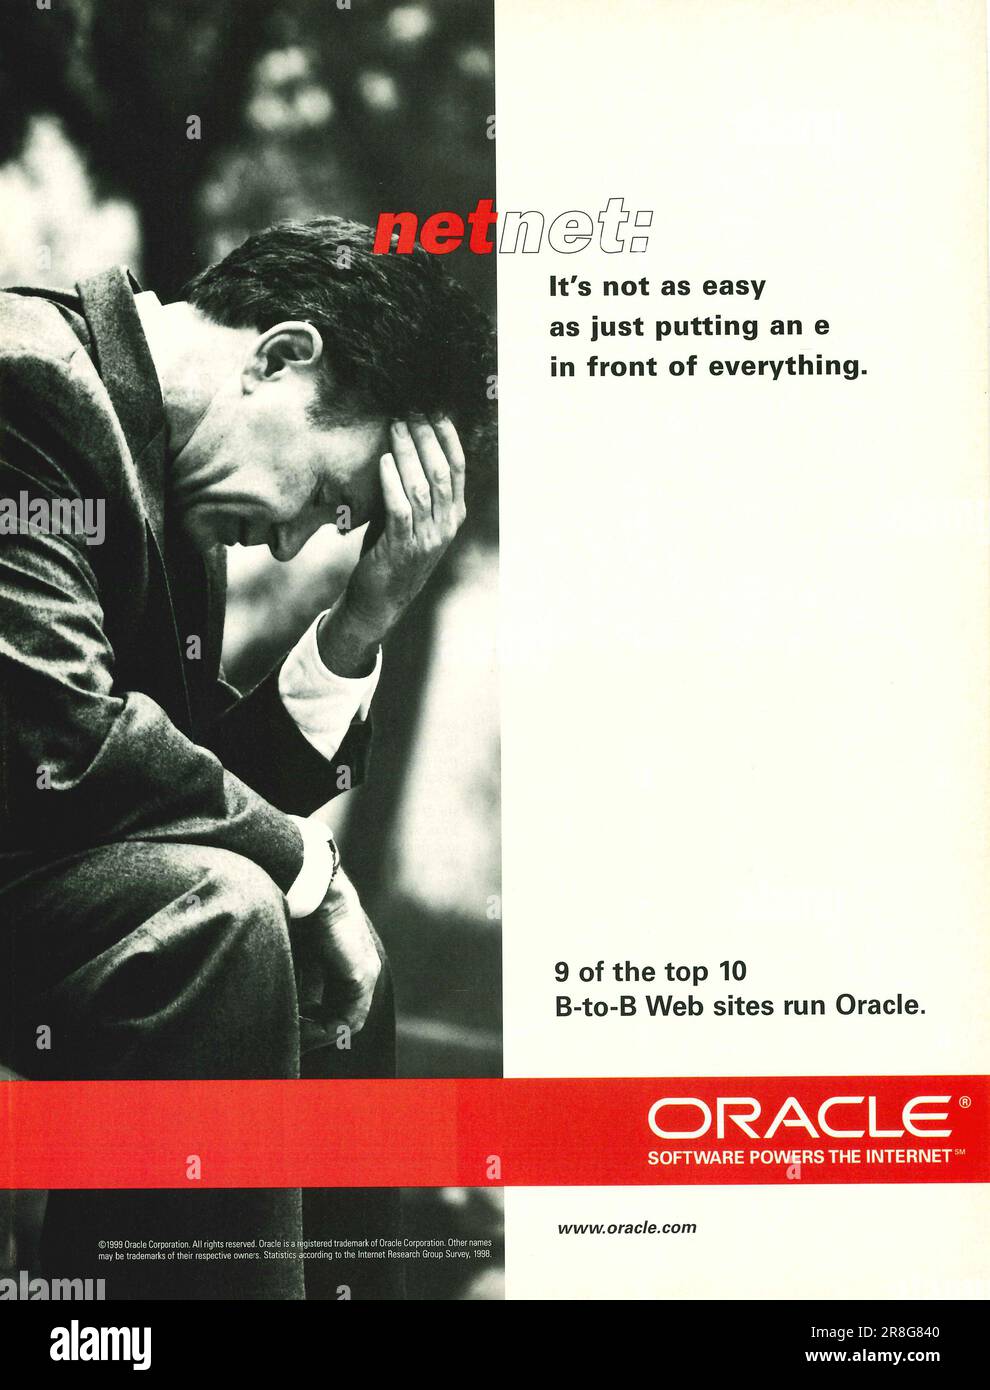 Oracle software advert in a magazine 1999. Oracle software powers the internet campaign Stock Photo